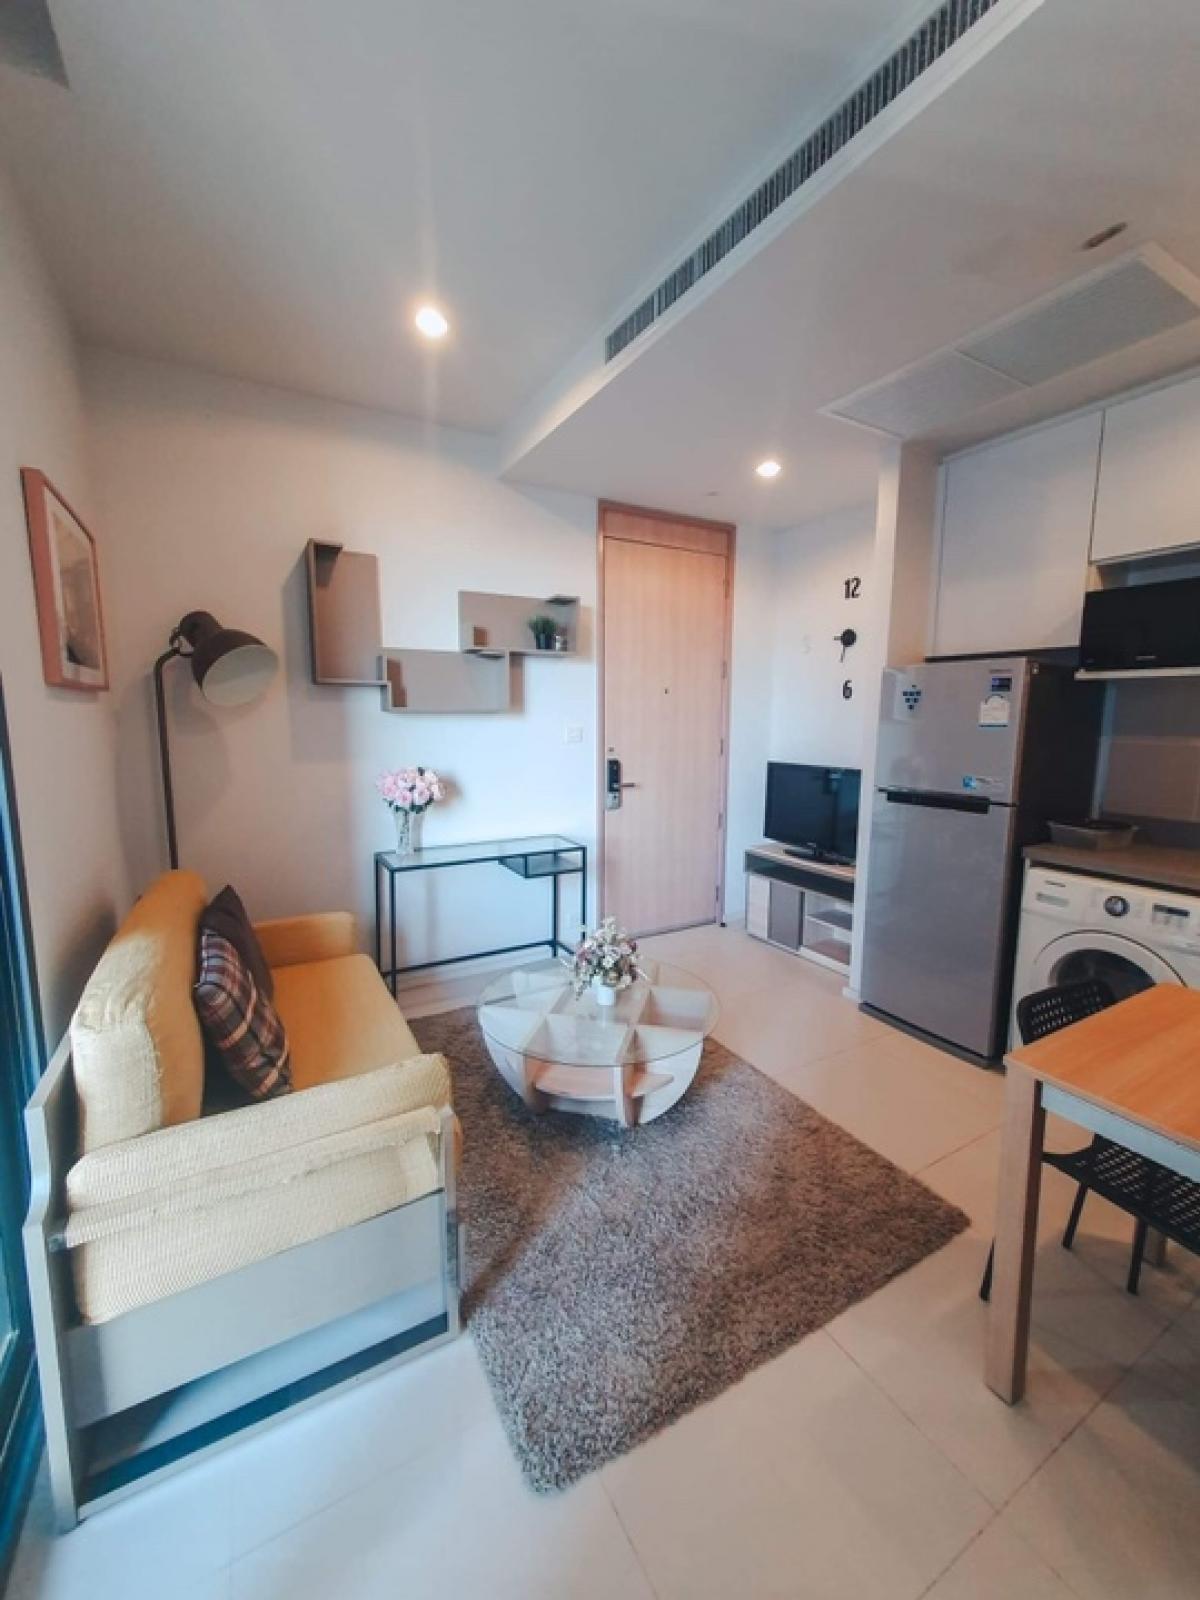 For RentCondoLadprao, Central Ladprao : Urgent for rent: M Ladprao (M Ladprao), property code #KK2043. If interested, contact @condo19 (with @ as well). Want to ask for details and see more pictures. Please contact and inquire.